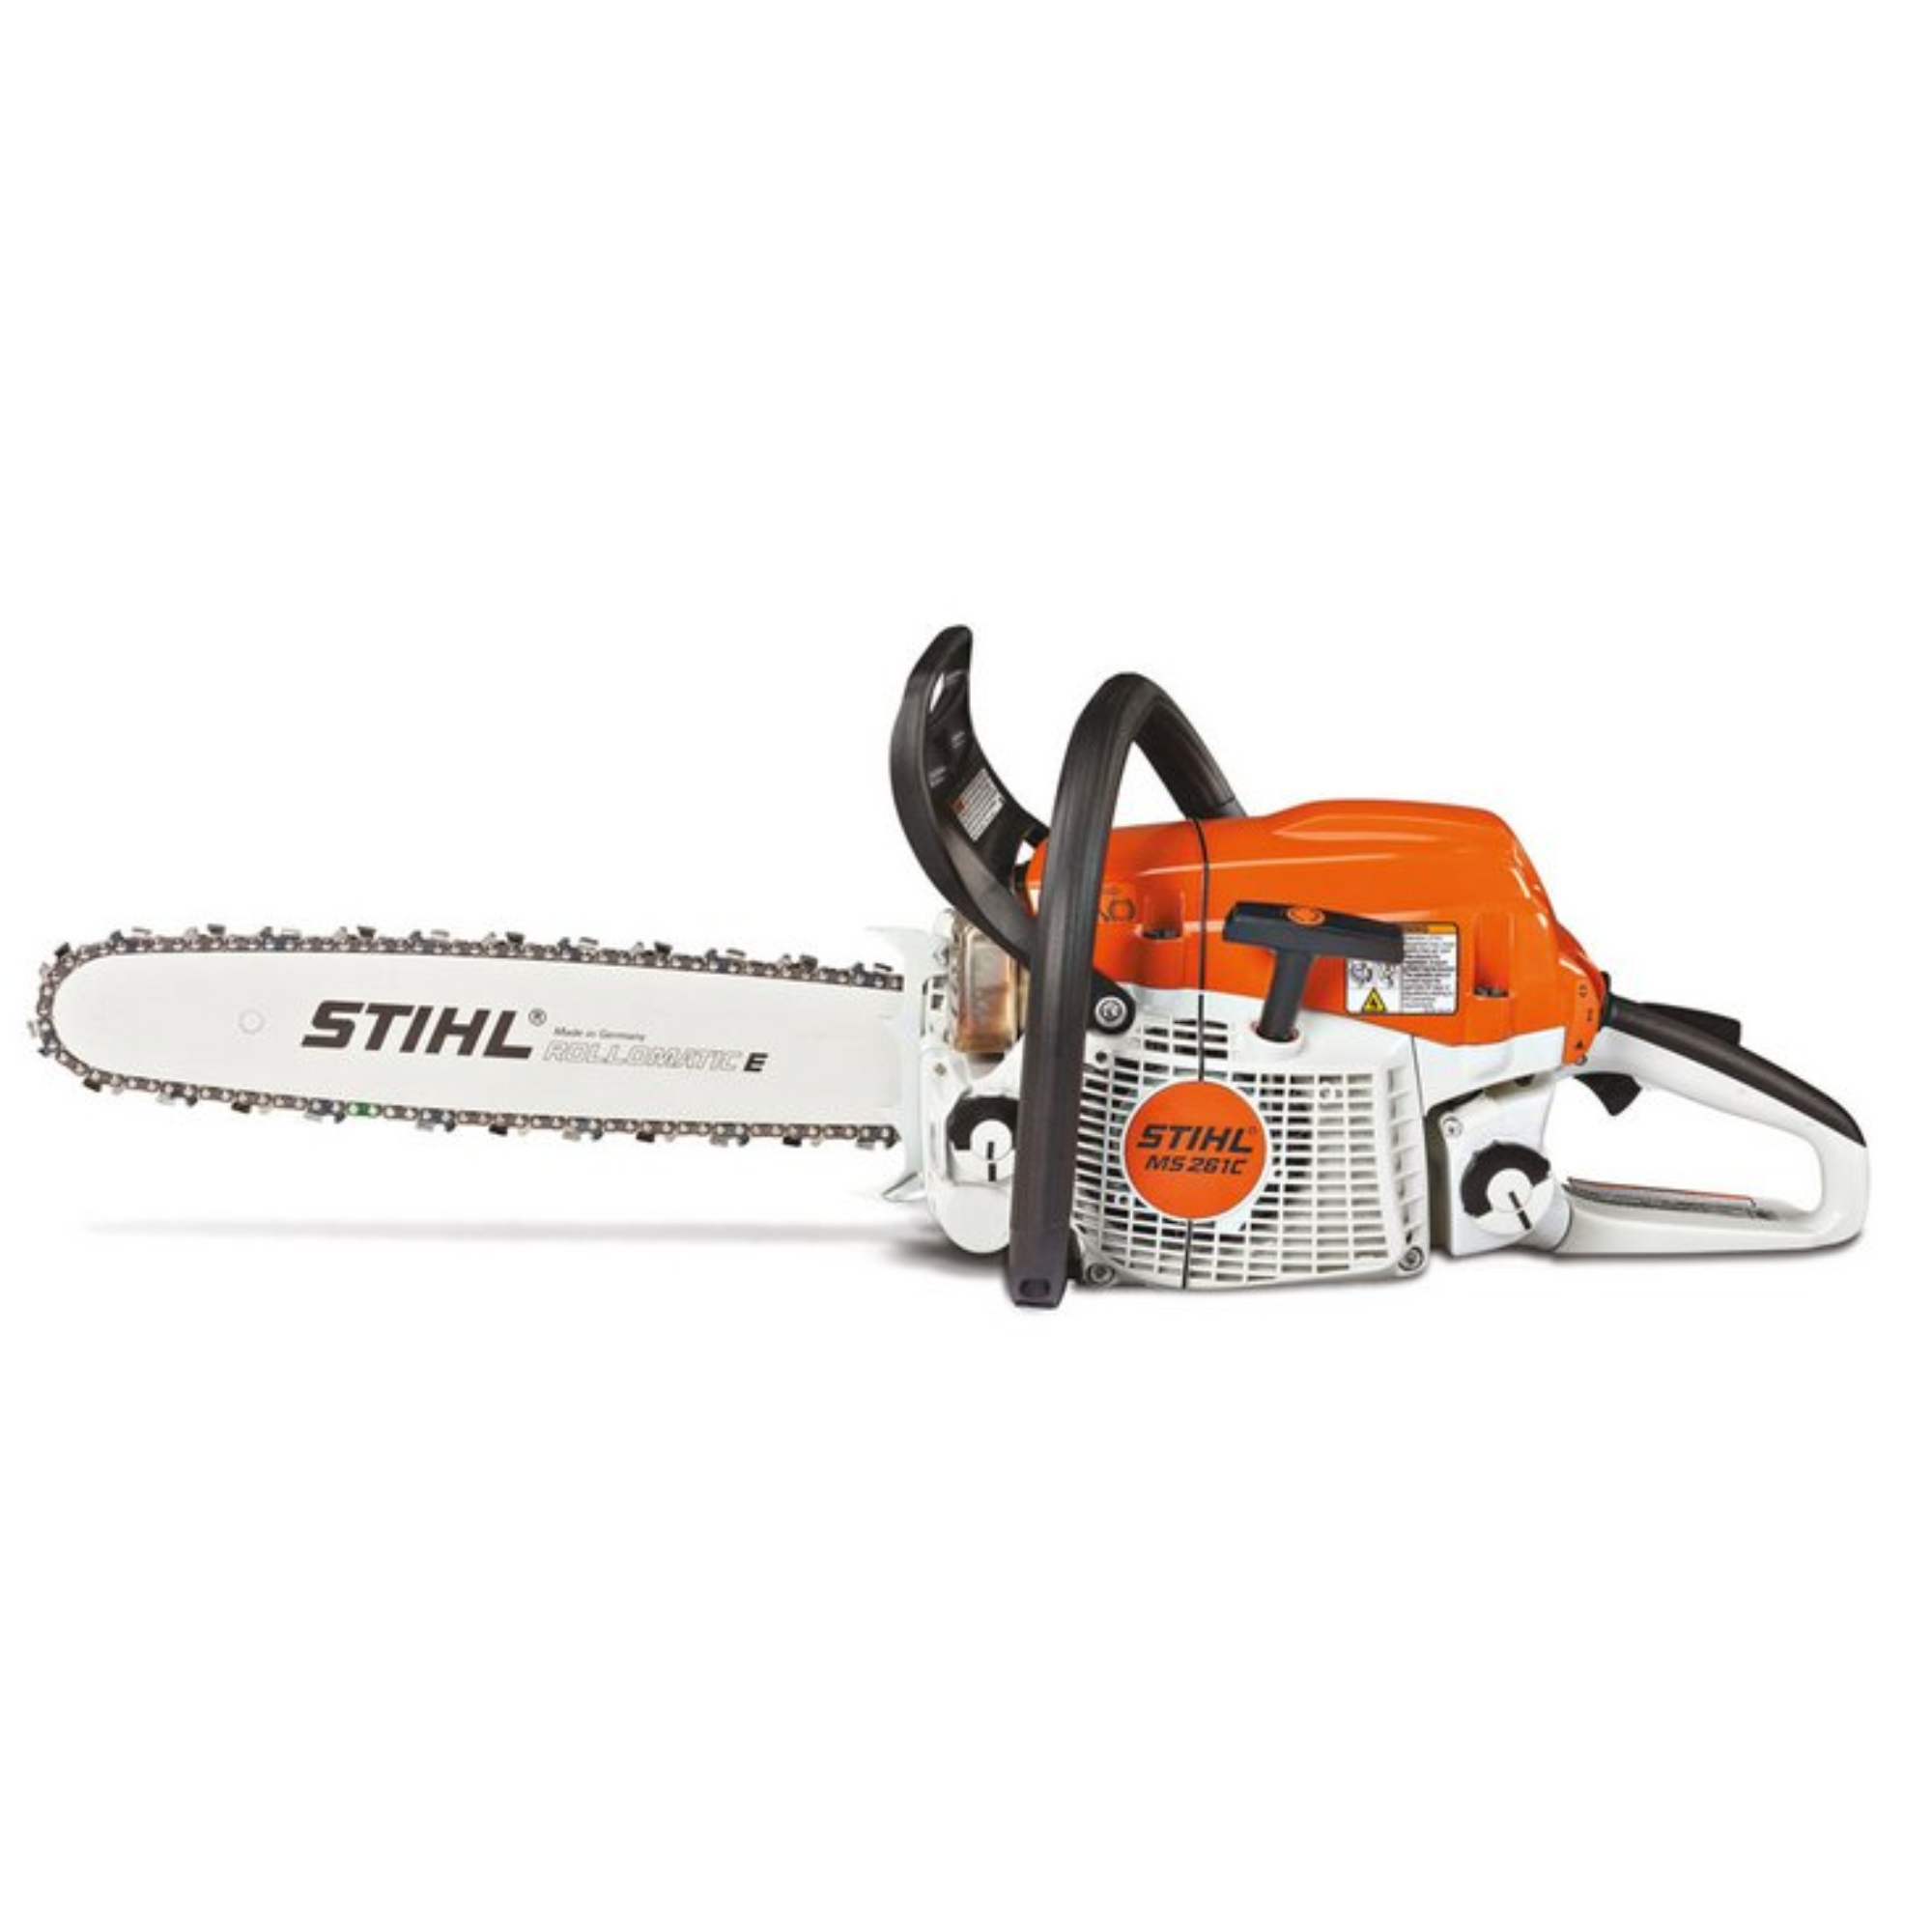 Stihl MS 261 C-M Gas Powered Chainsaw with M-Tronic